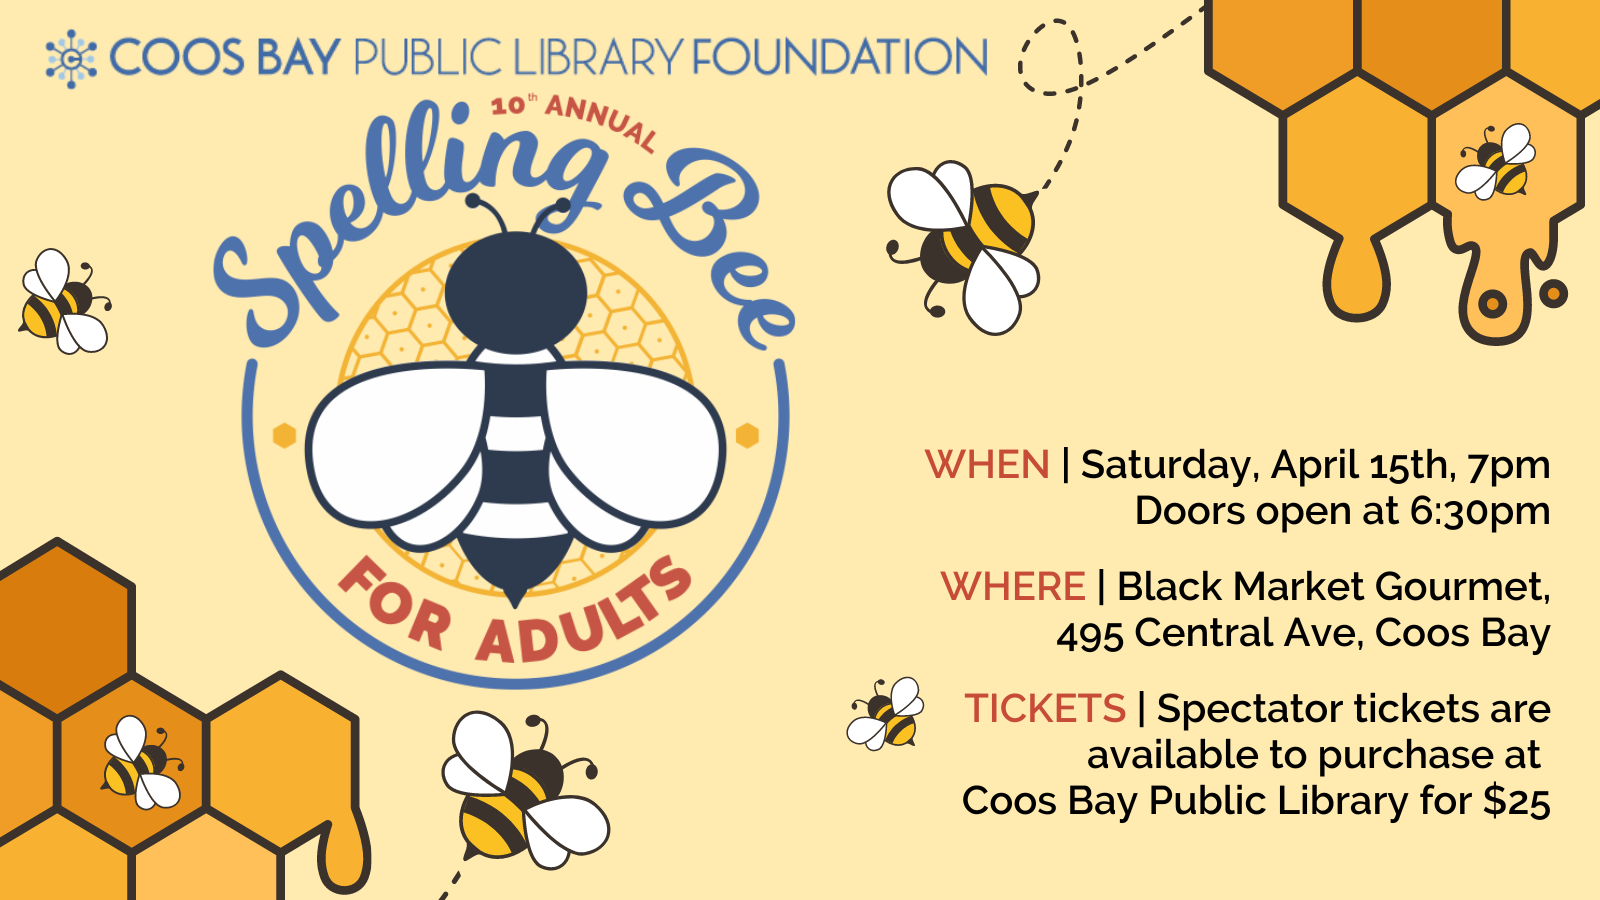 Coos Bay Public Library Foundation 10th Annual Adult Spelling Bee, Saturday, April 15 at 7pm, doors open at 6:30pm, located at Black Market Gourmet, 495 Central Ave, Coos Bay, tickets can be 